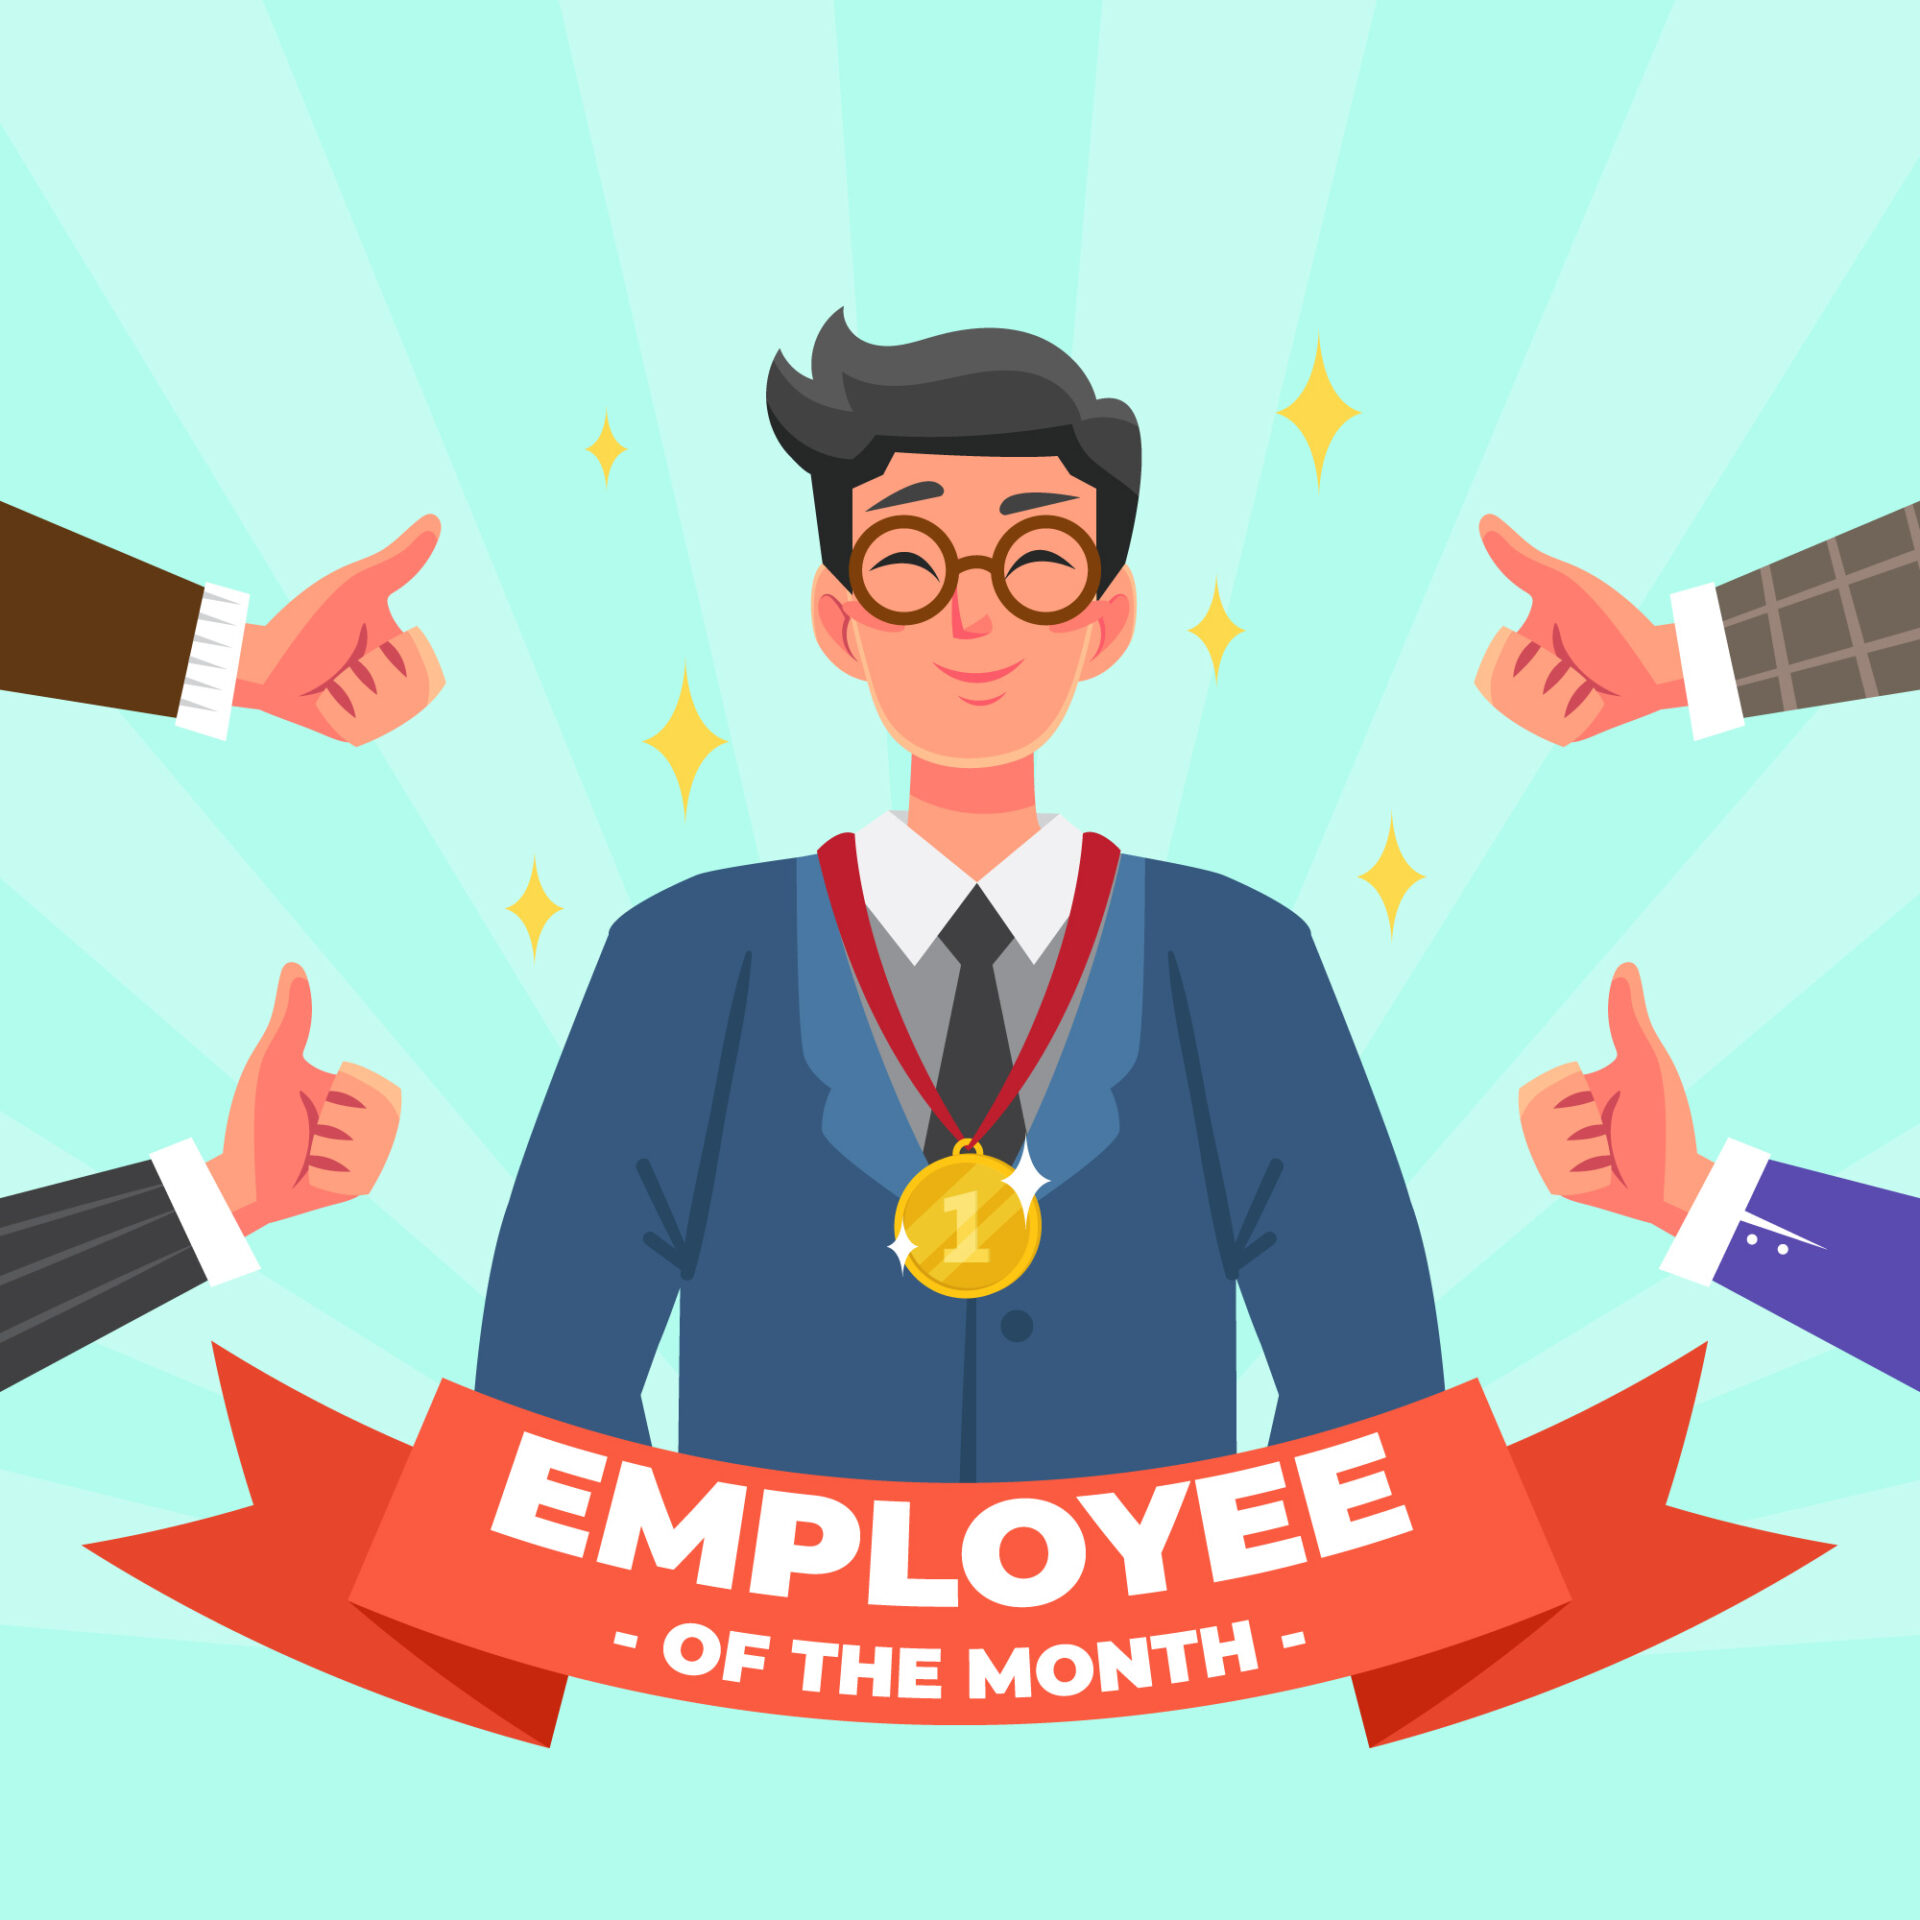 An image of an employee standing at the center wearing a gold medal because he is the employee of the month, surrounded by four thumbs-up symbols.